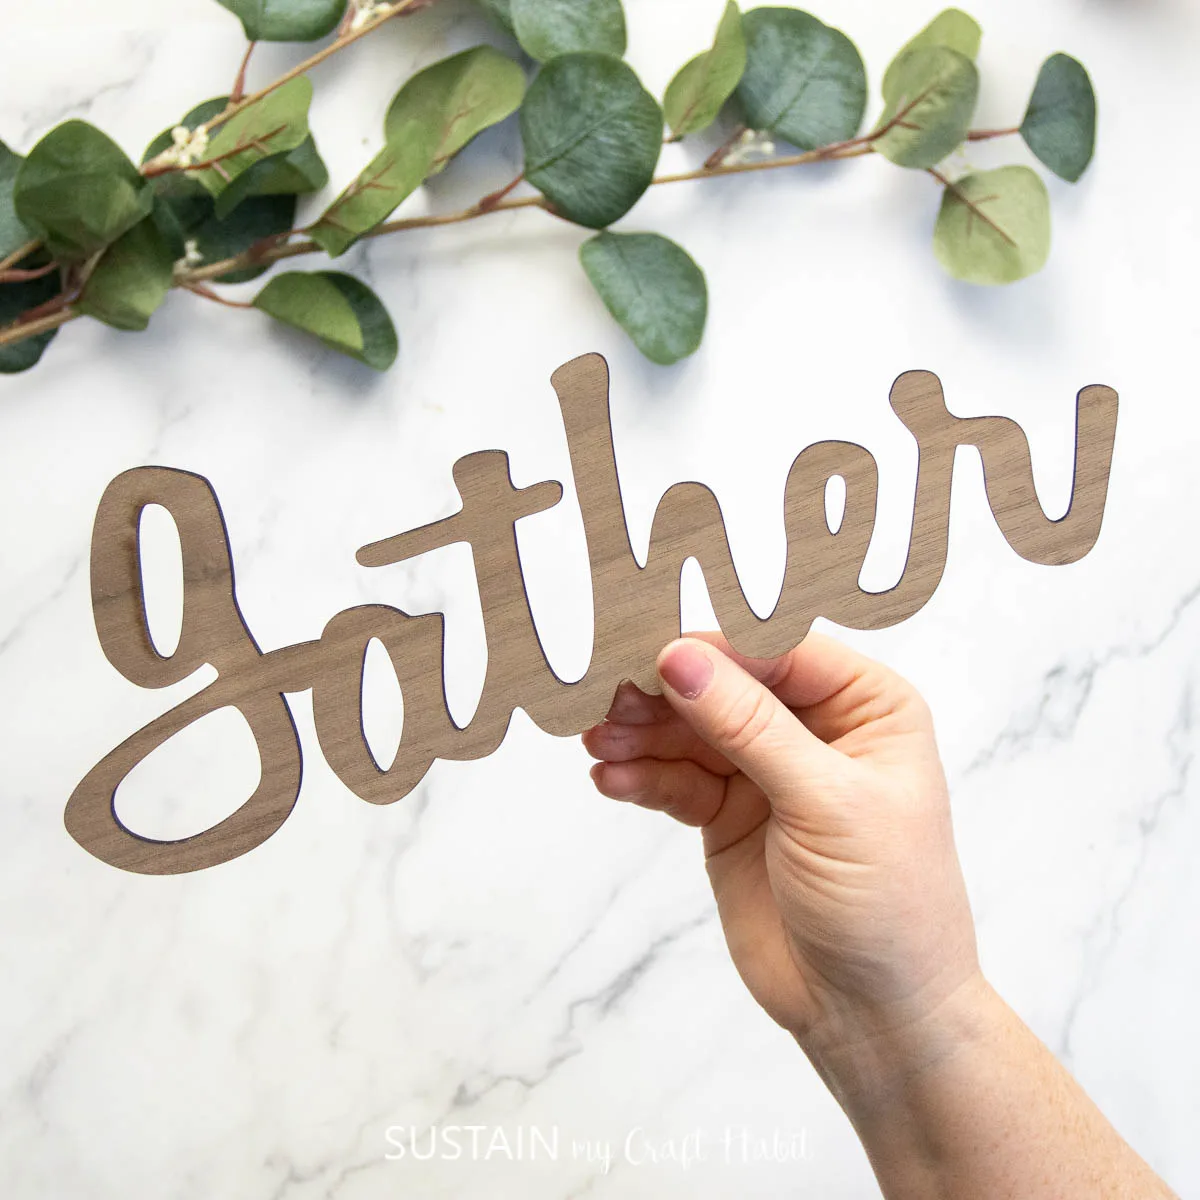 Hand holding a laser cut wood sign that says "gather."